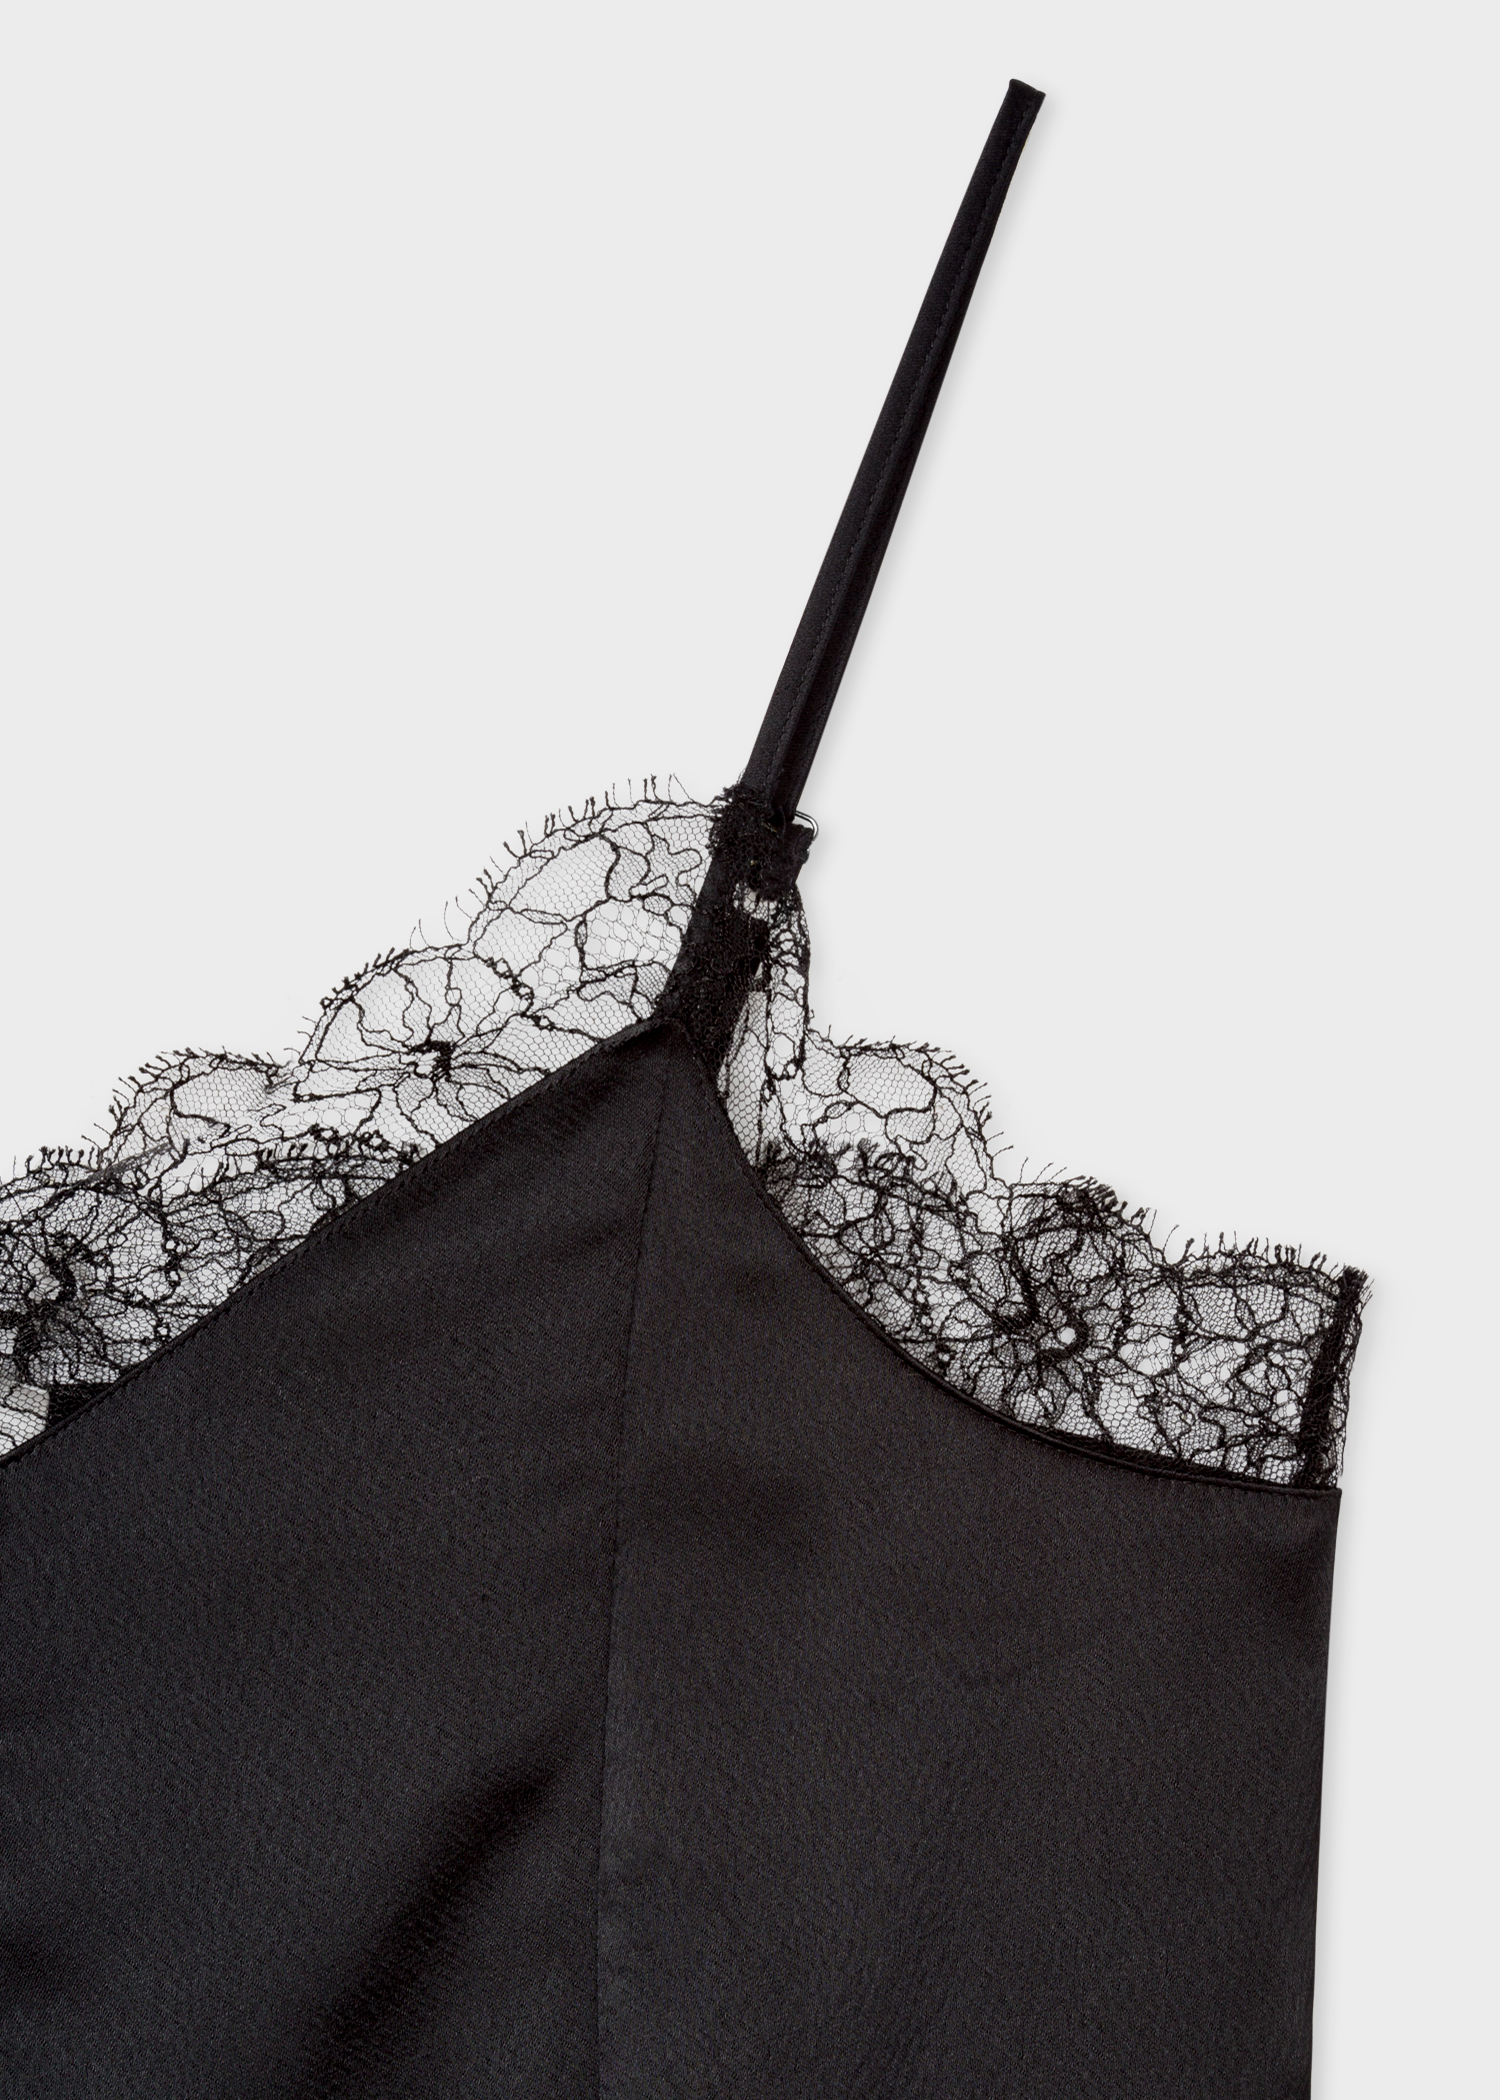 Detail view - Women's Black Satin Tuxedo Cami Top with Lace Trims Paul Smith